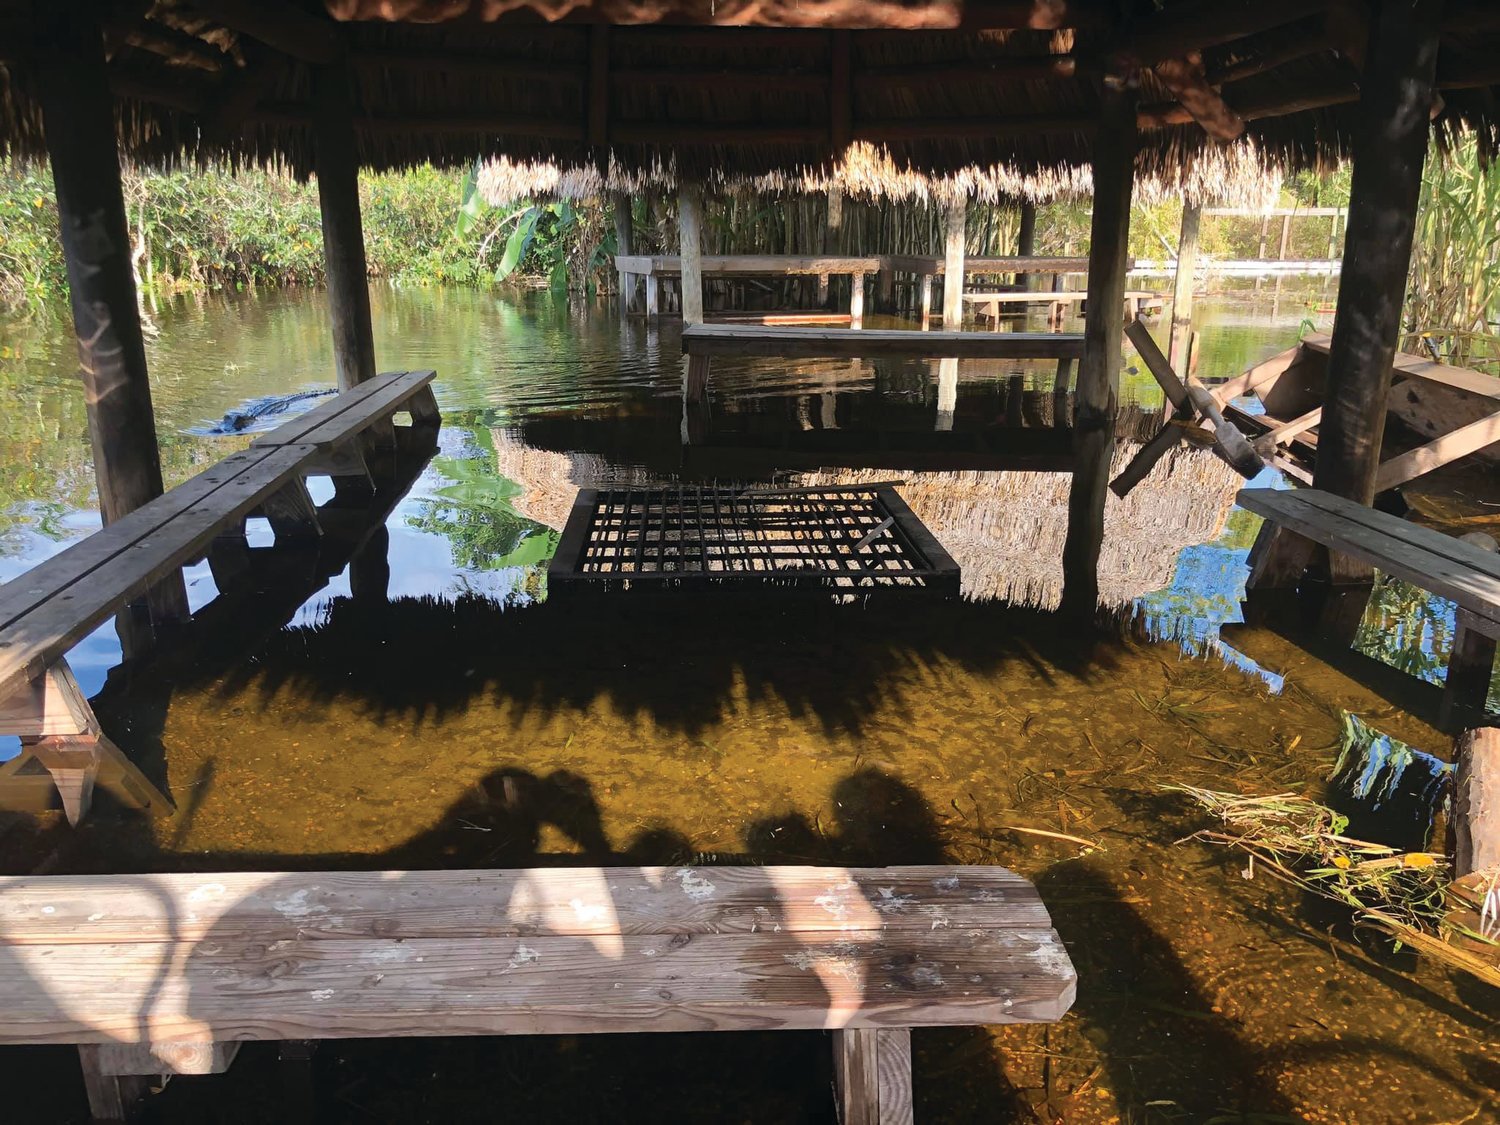 OKEECHOBEE — Betty Osceola of the Miccosukee Tribe shared this photo of flooding in the Everglades on Nov. 22: “Since the time high water flooded Tear Island, we haven’t been able to light any fires in the cooking chickee. Before then we lit the fire every day. The cooking grate top is about an inch out of water. Our fires in our cooking chickees are sacred to the Miccosukee and Seminole; they are not just fires lit for cooking. Fire is a very sacred elder we pray to daily and care for, it is a spiritual connection.”